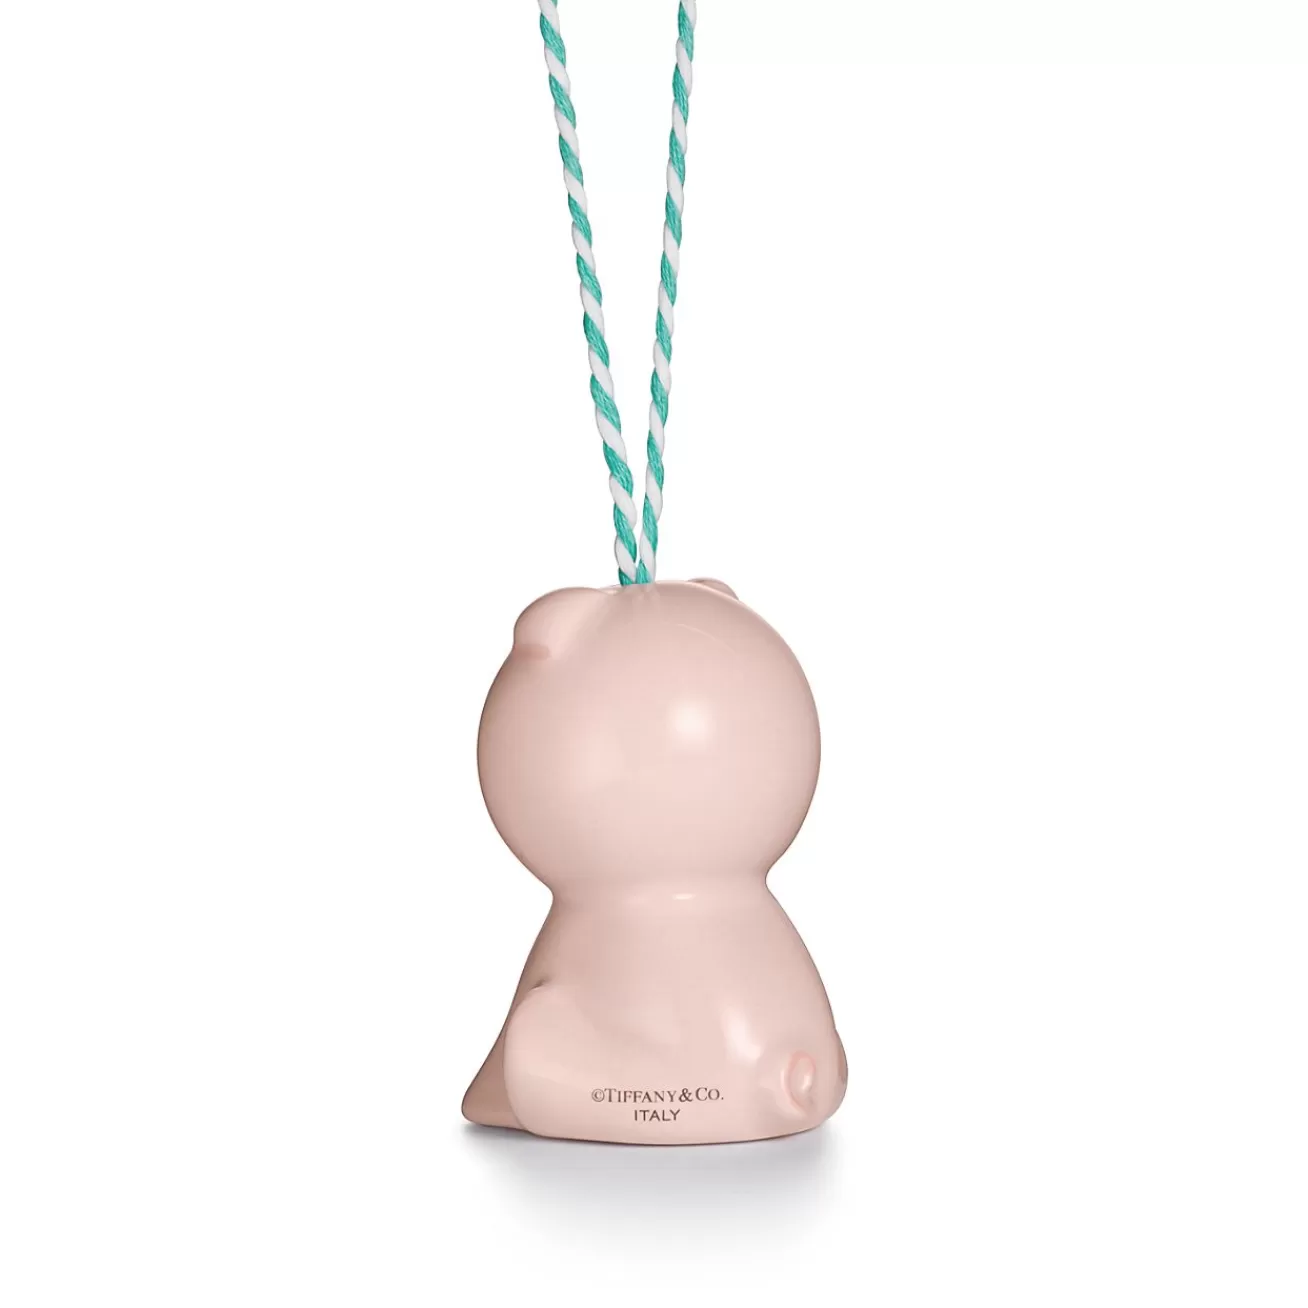 Tiffany & Co. Tiny Tiffany Pig Ornament in Multicolored Earthenware | ^ Baby | Baby